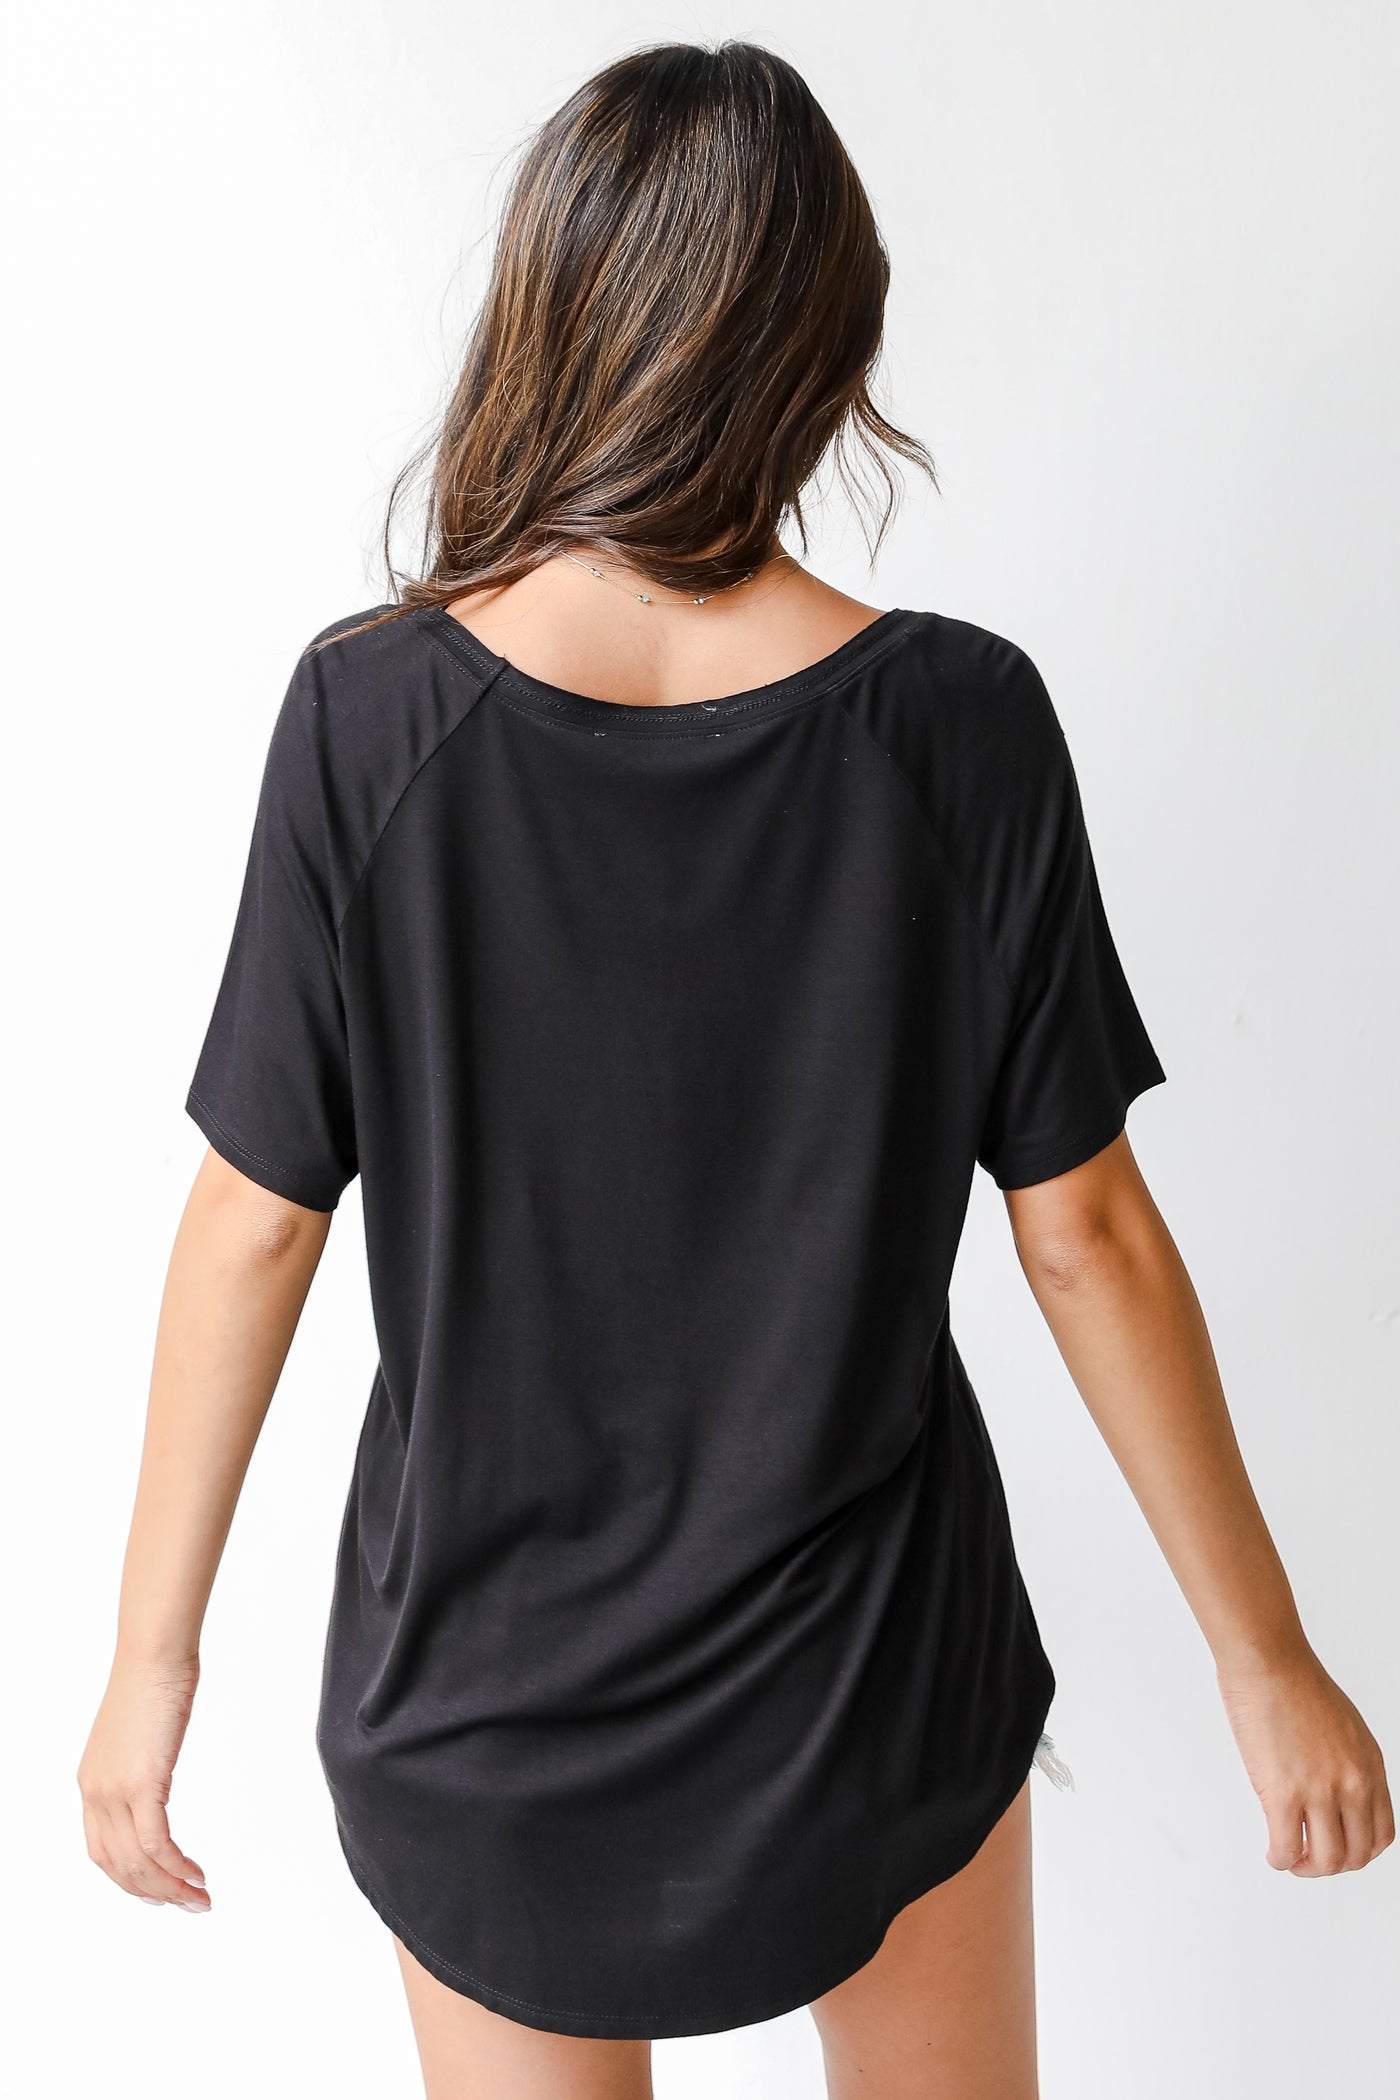 Basic Everyday Tee in black back view